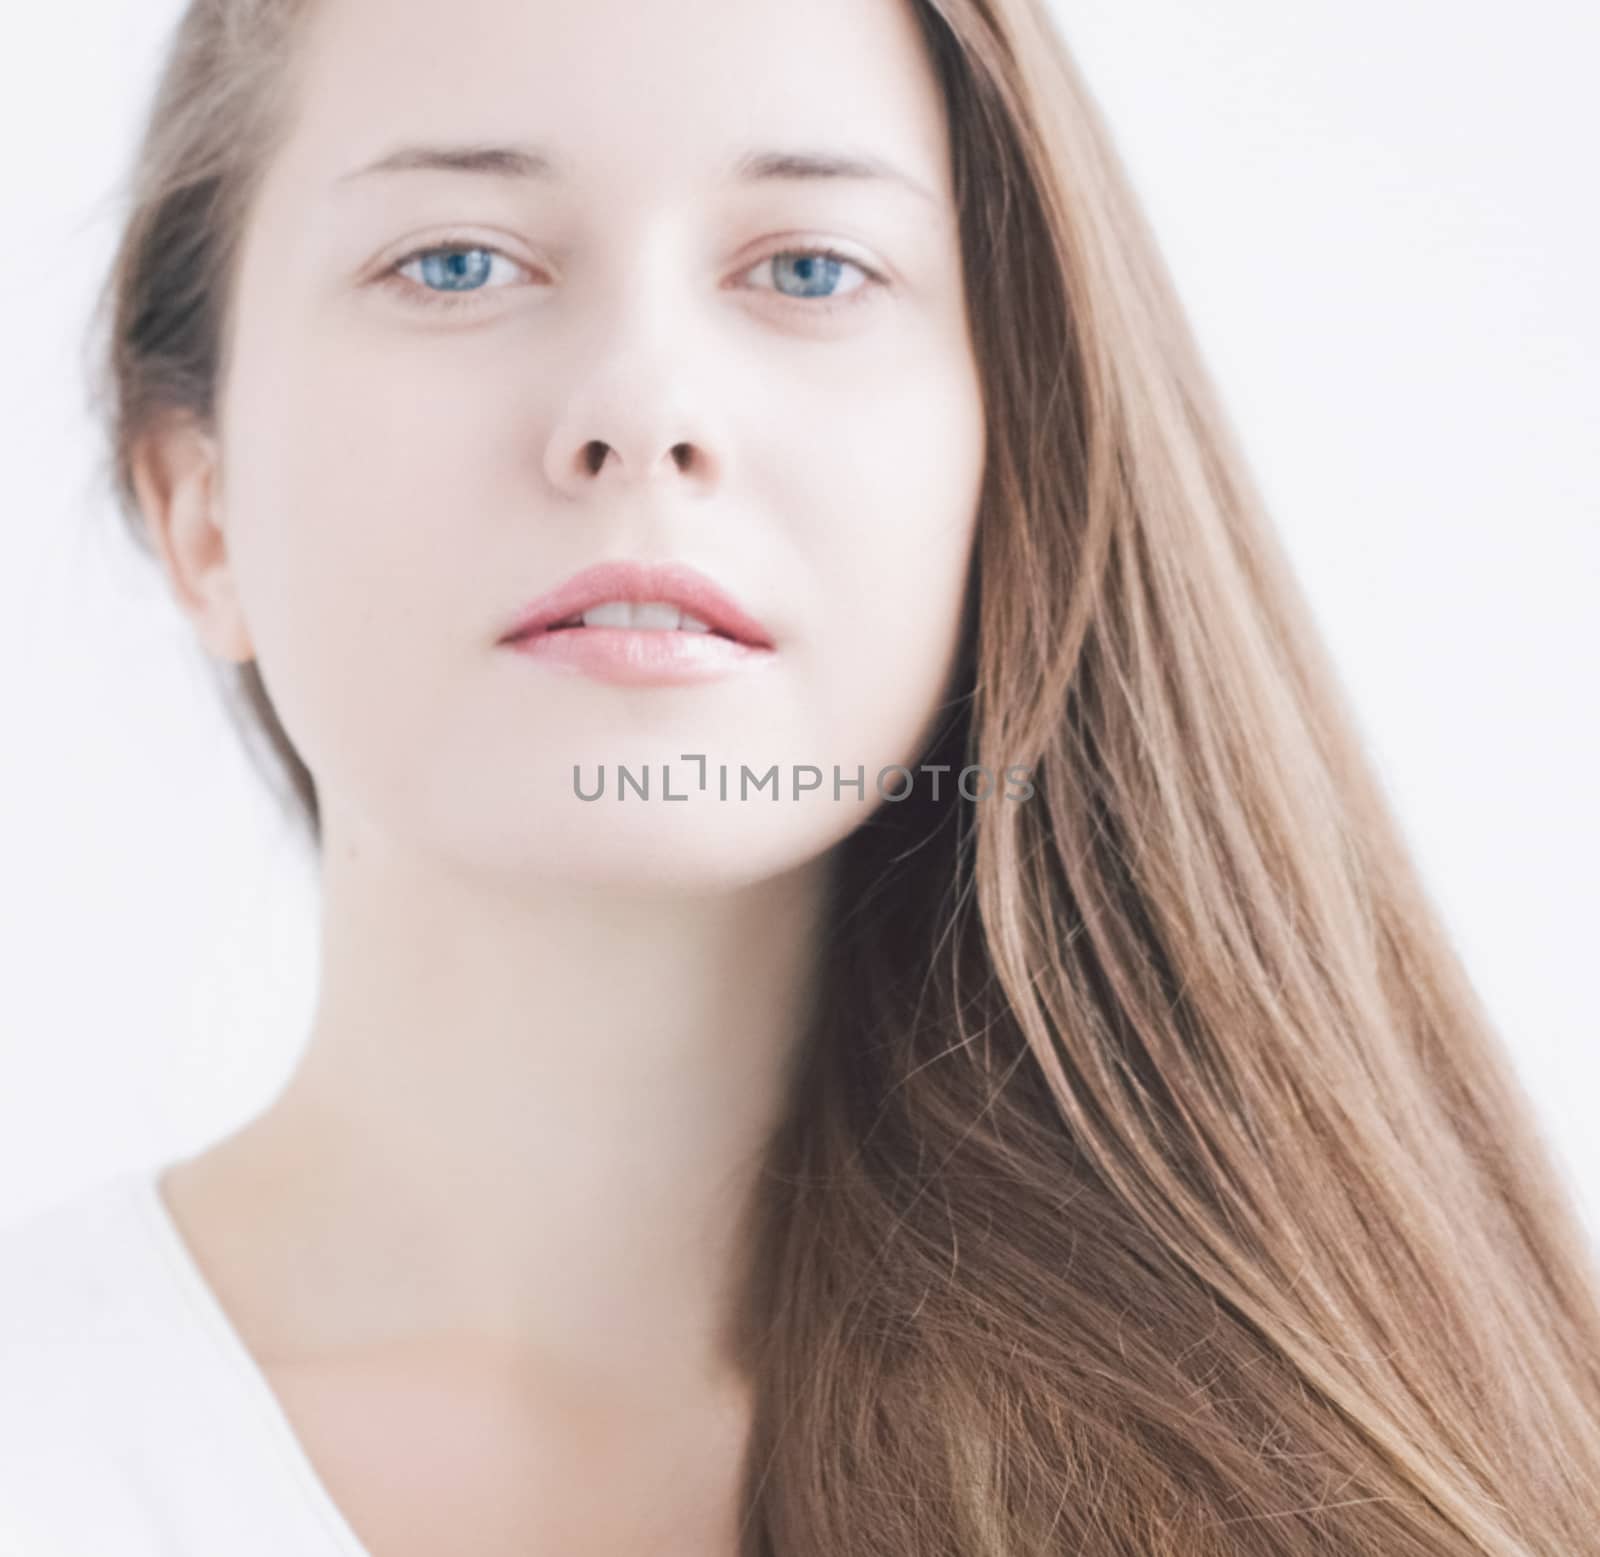 Beauty face portrait of a young woman, natural makeup look, skincare and hair care brand